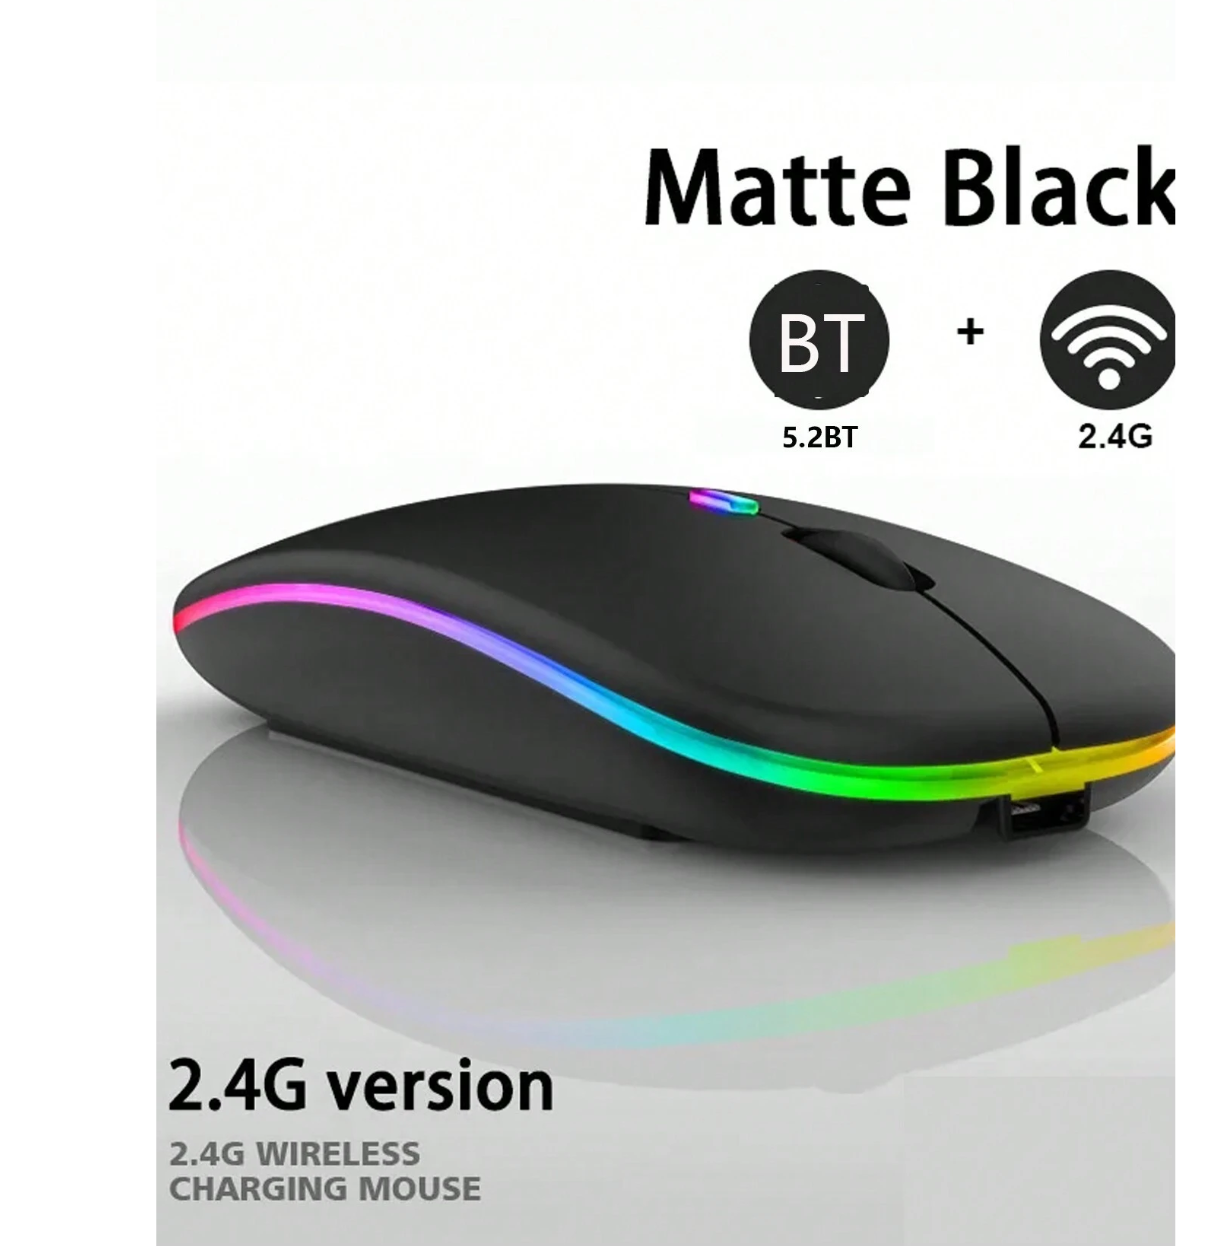 Glowing Precision: Rechargeable Dual-Mode Wireless Mouse for Computer/Laptop - Perfect for Office and Gaming!